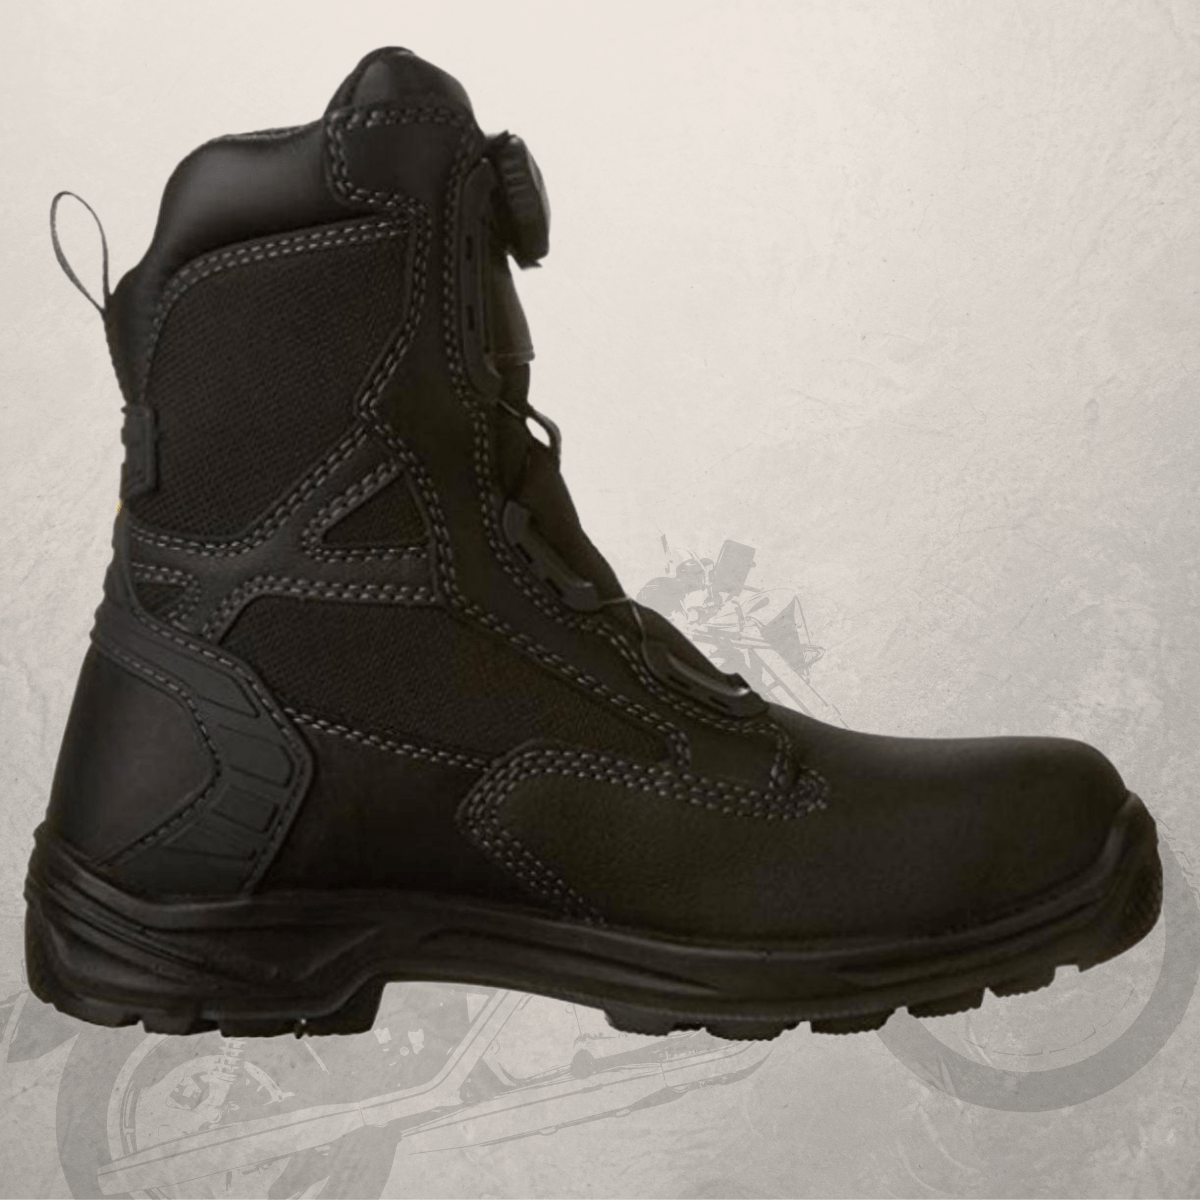 Boa Work Boots Terra Rexton BOA® Best for Motorcycle & Work